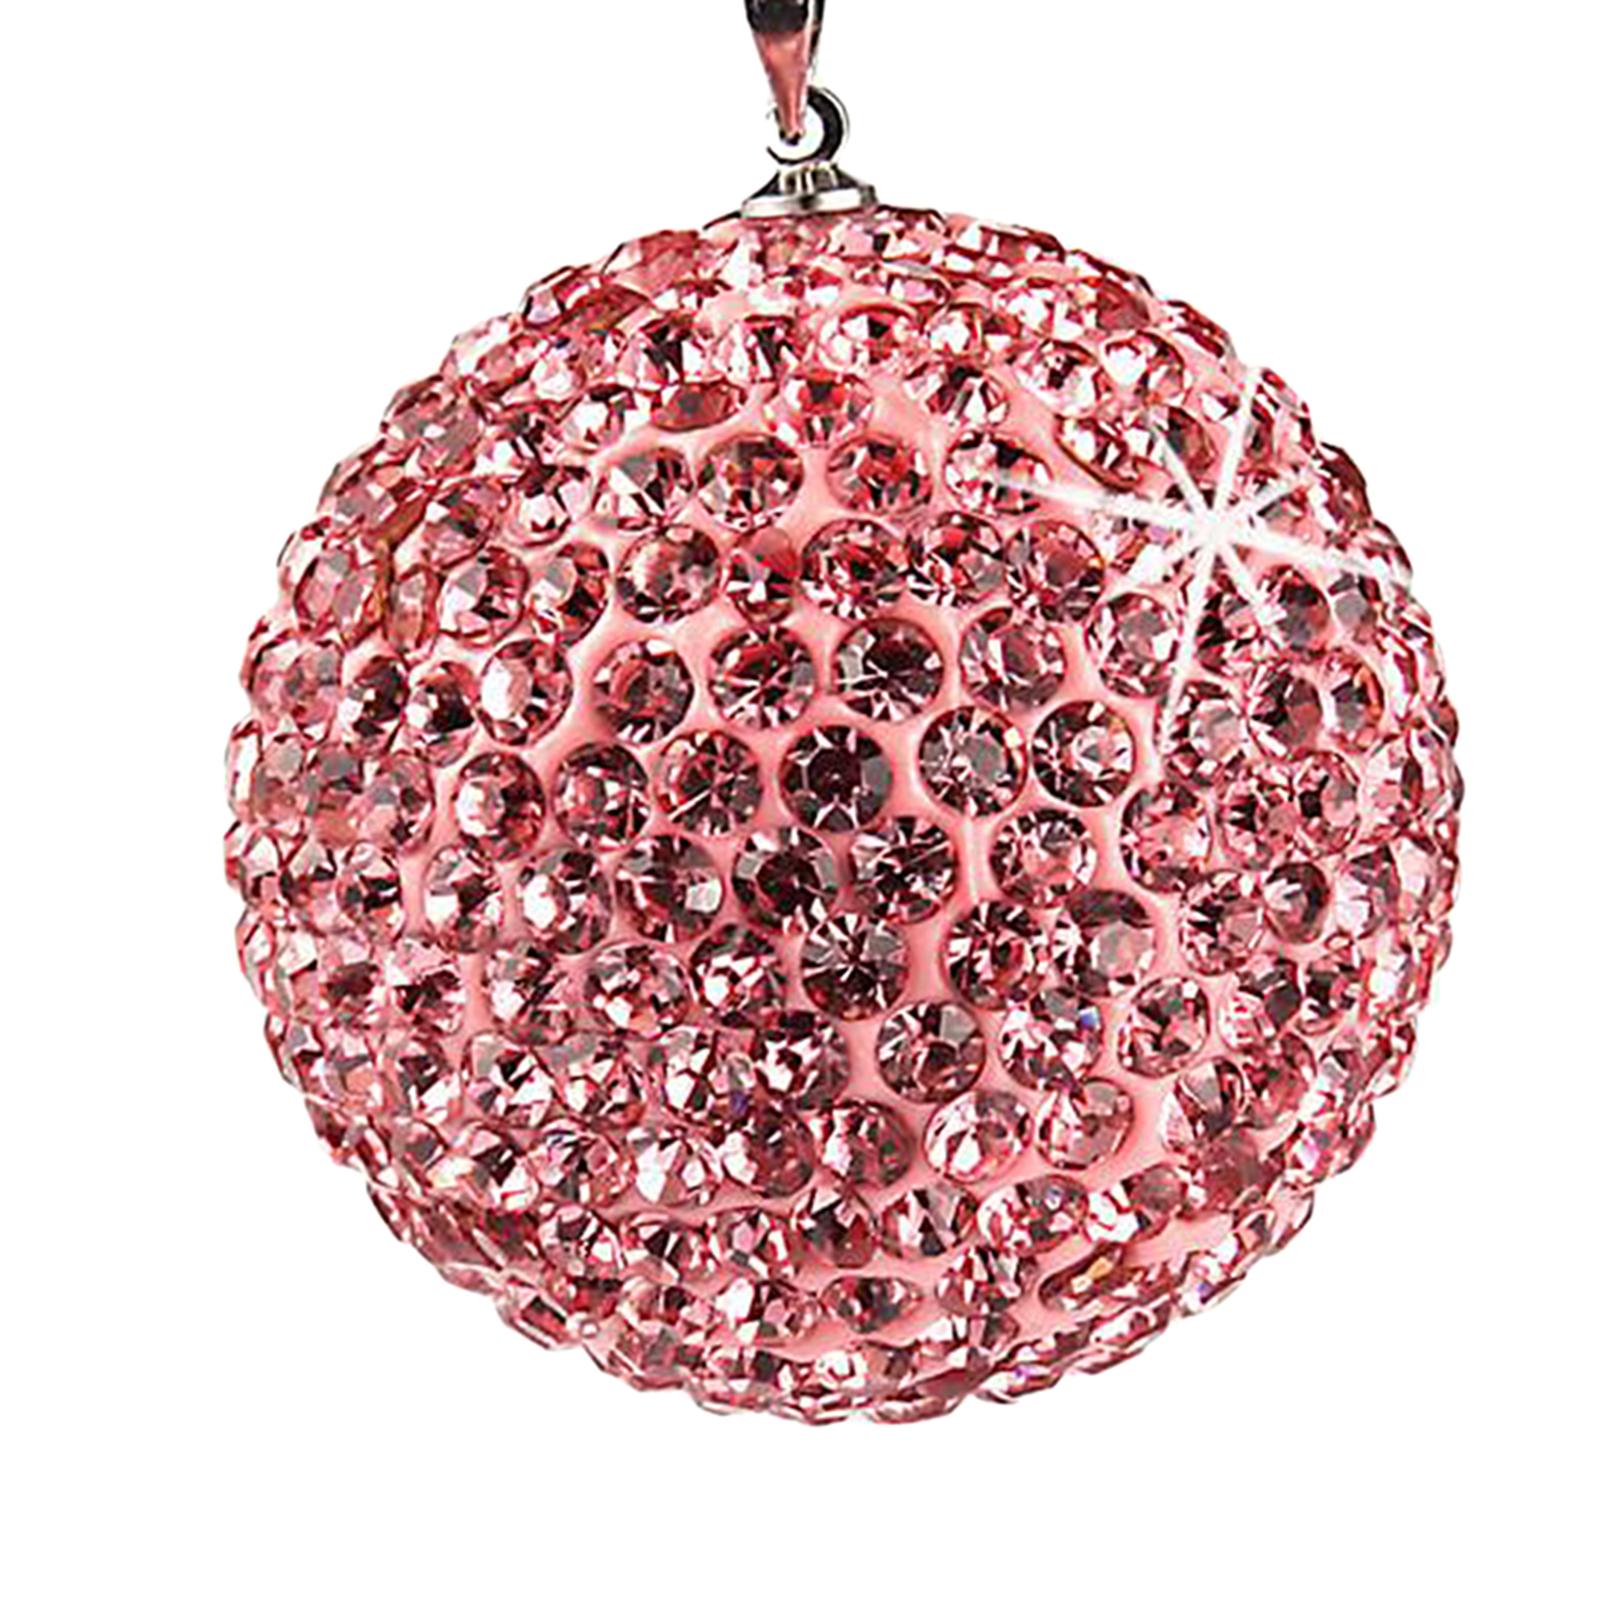 Diamond Crystal Ball Cars Charms Car Pendant for Ornament Rear View Mirror pink